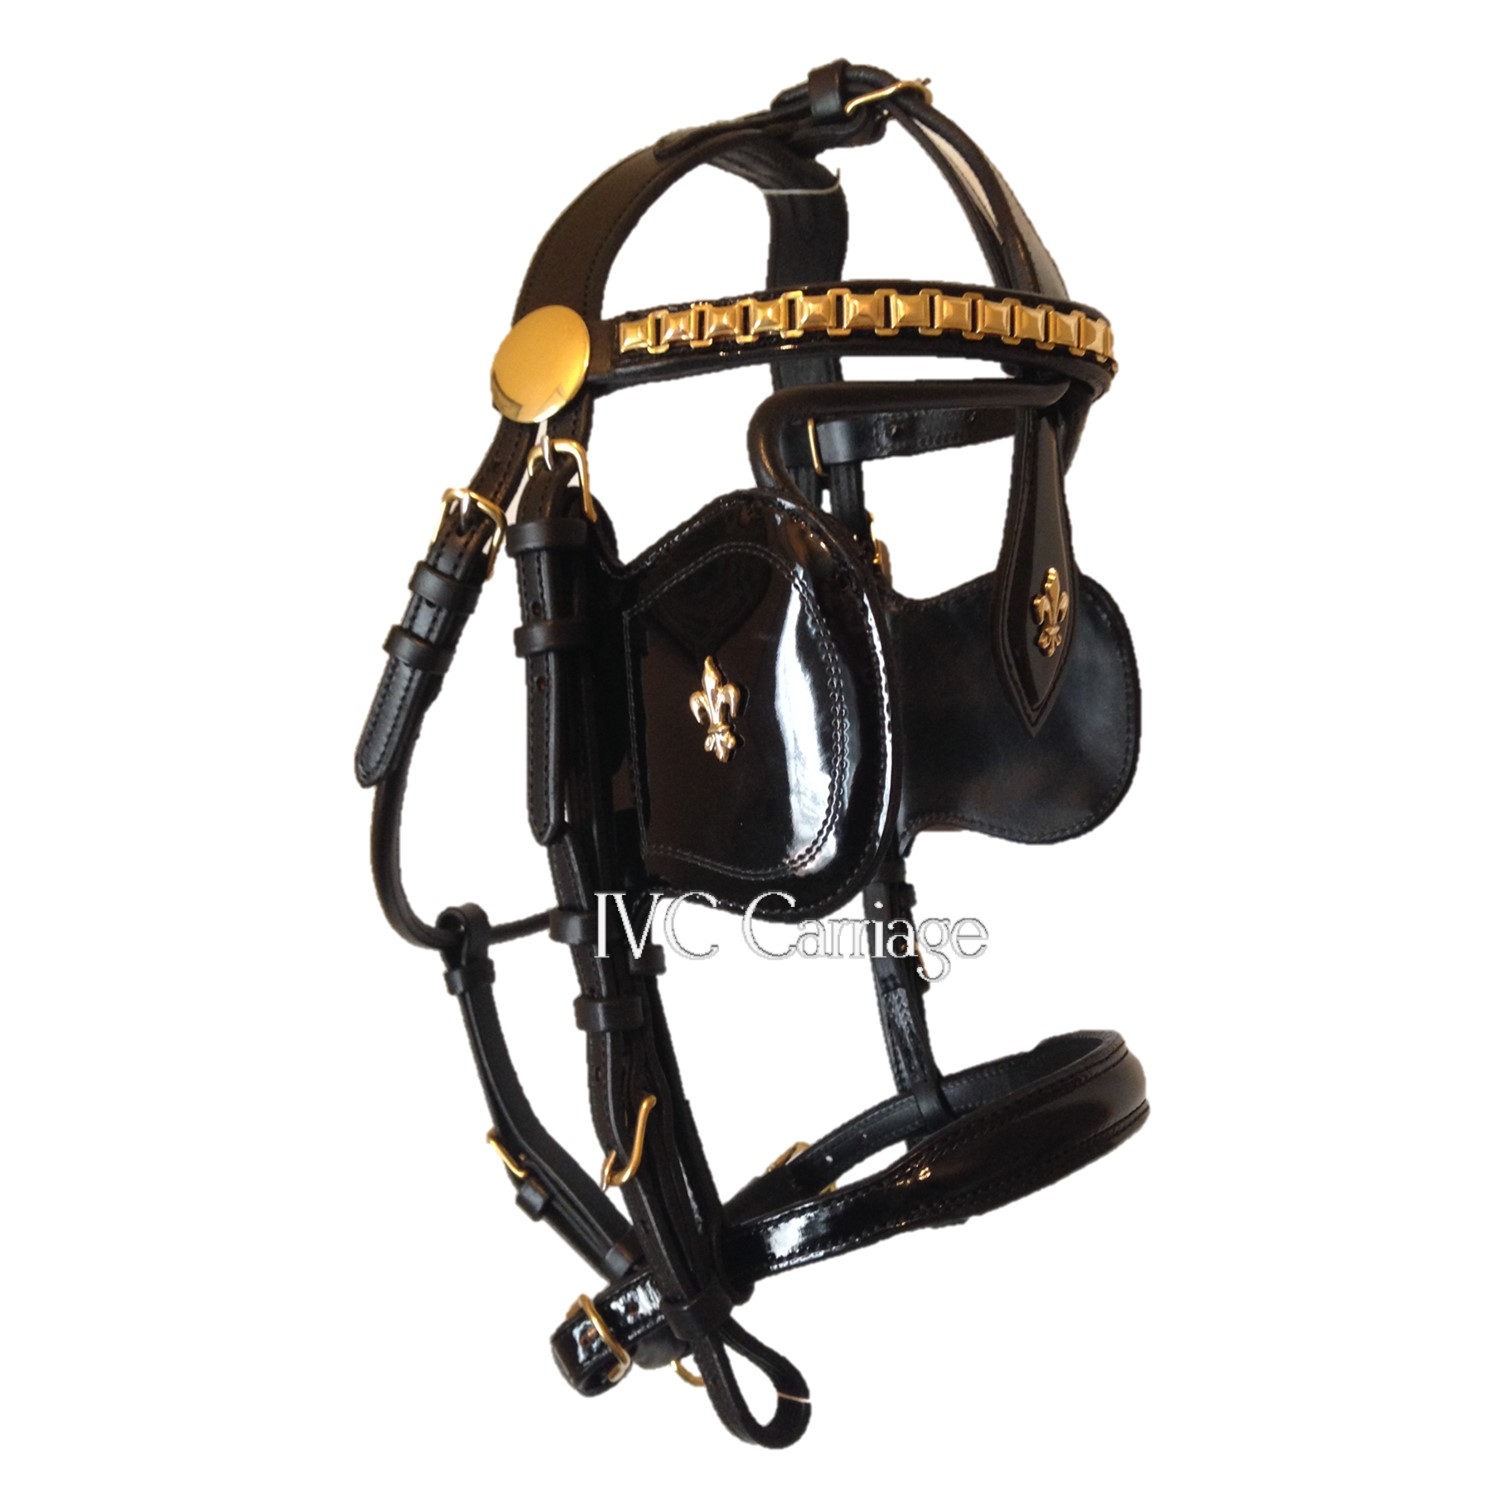 Extra Elite Horse Harness | IVC Carriage